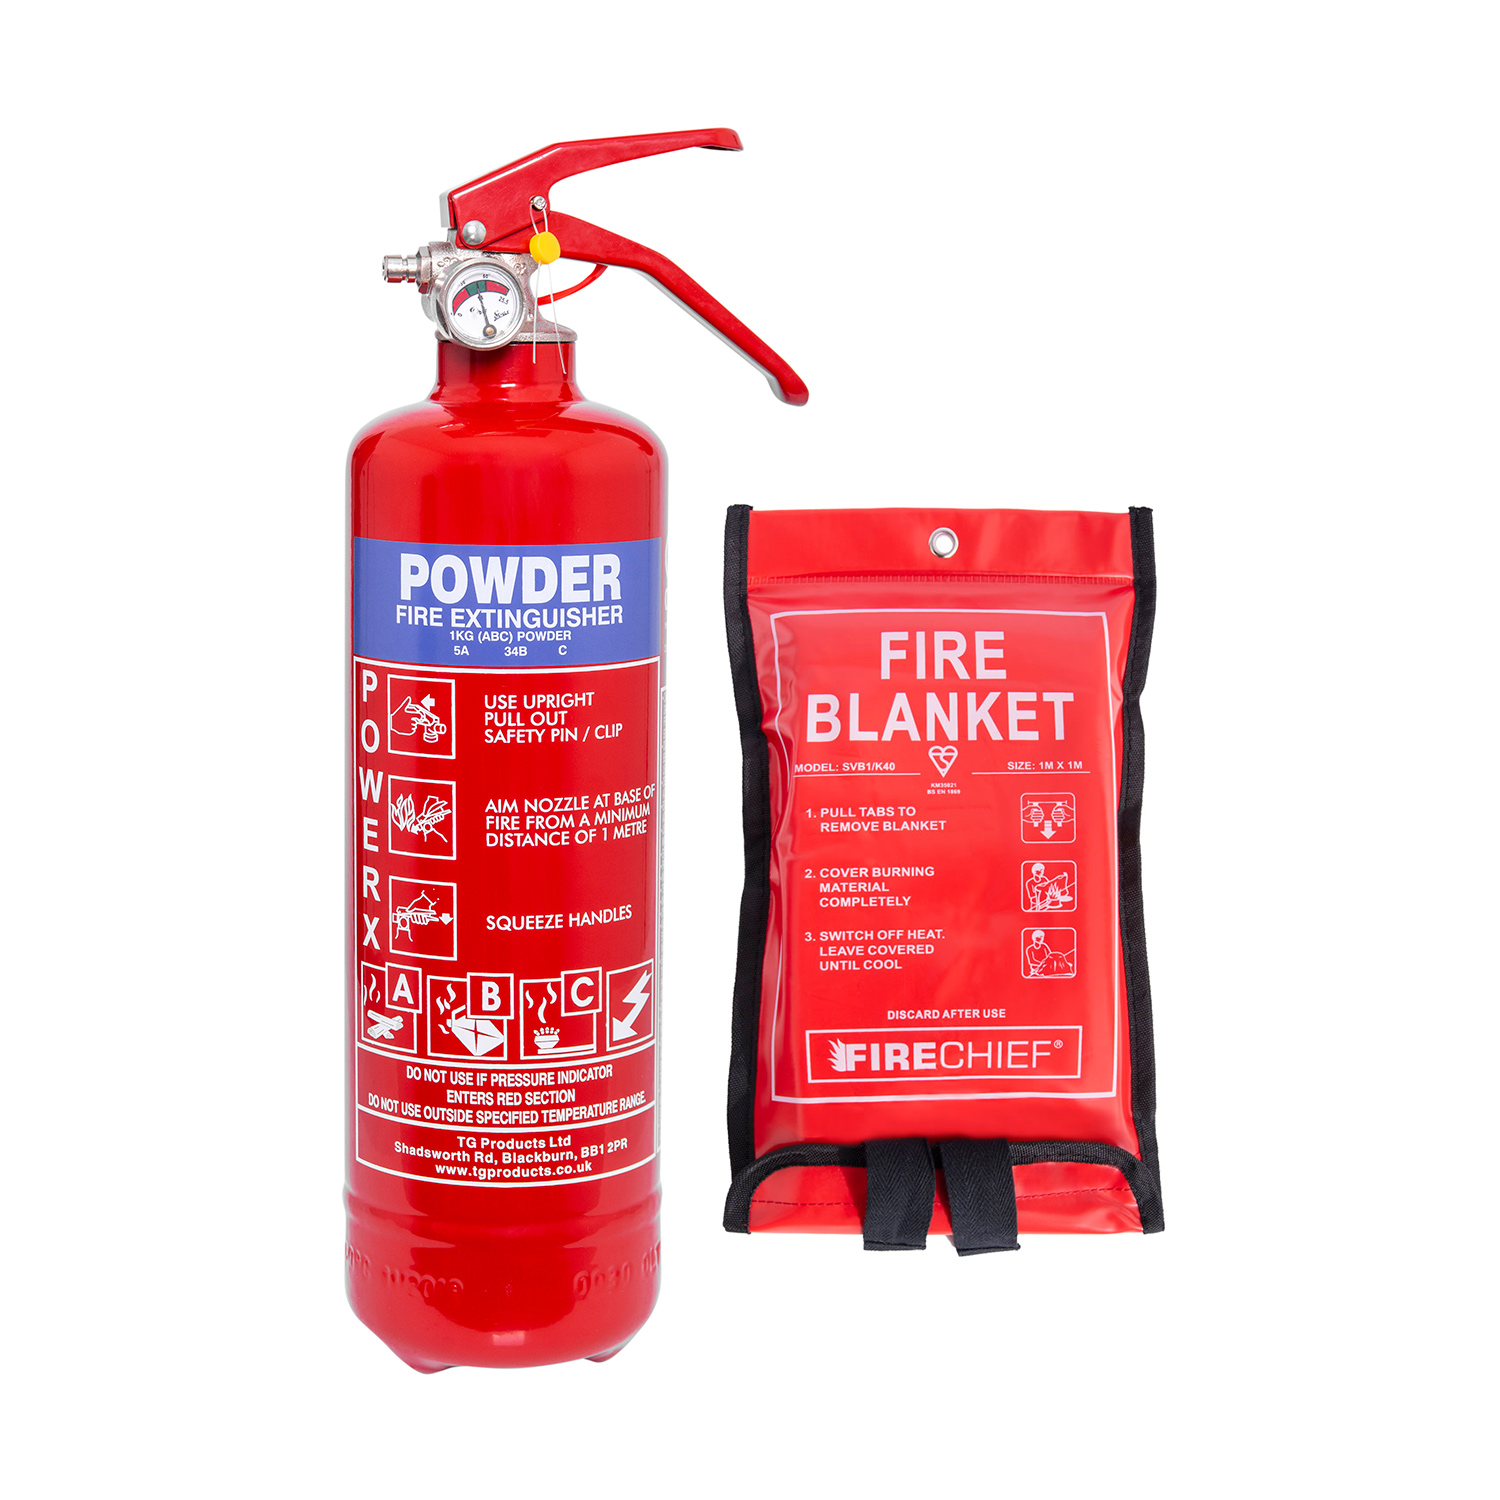 1kg Powder Fire Extinguisher and Fire Blanket Offer